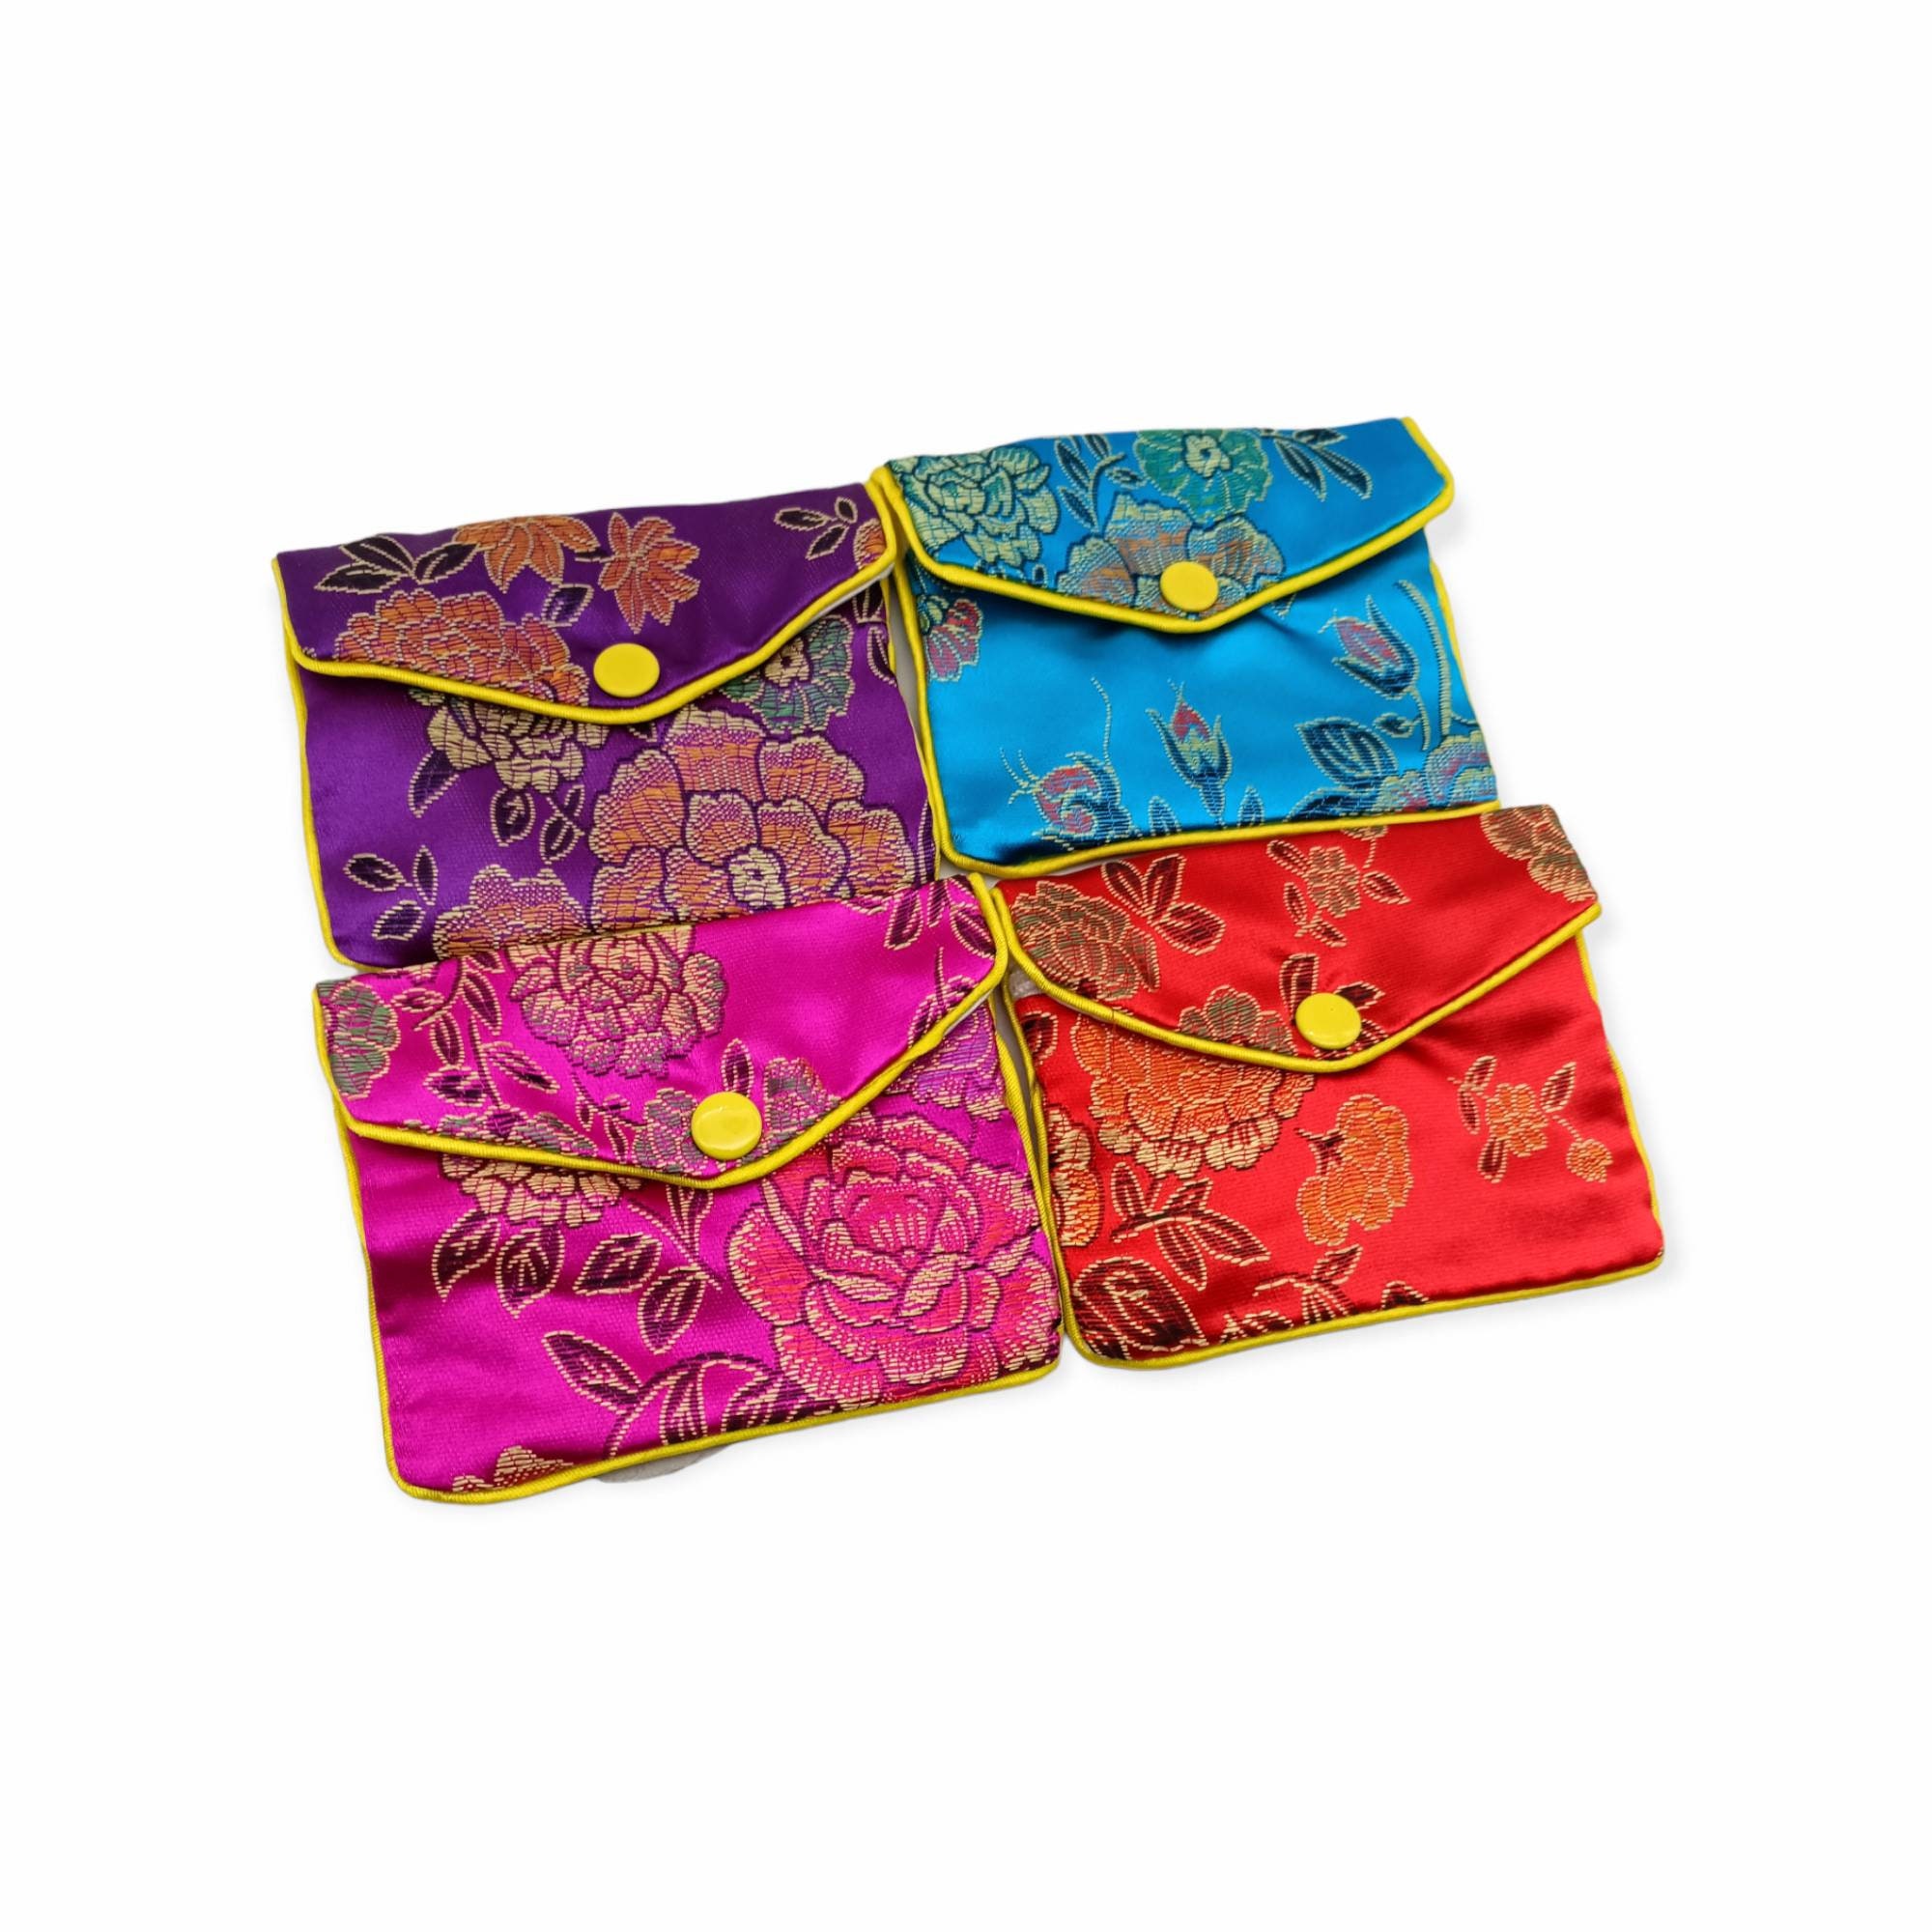 Tofficu 20 Pcs Drawstring Bag Chinese Silk Style Bag Small Chinese Pouch  Wedding Gift Bag Small Coin Pouch Sachet Wallet Bracelet Bags Small Silk